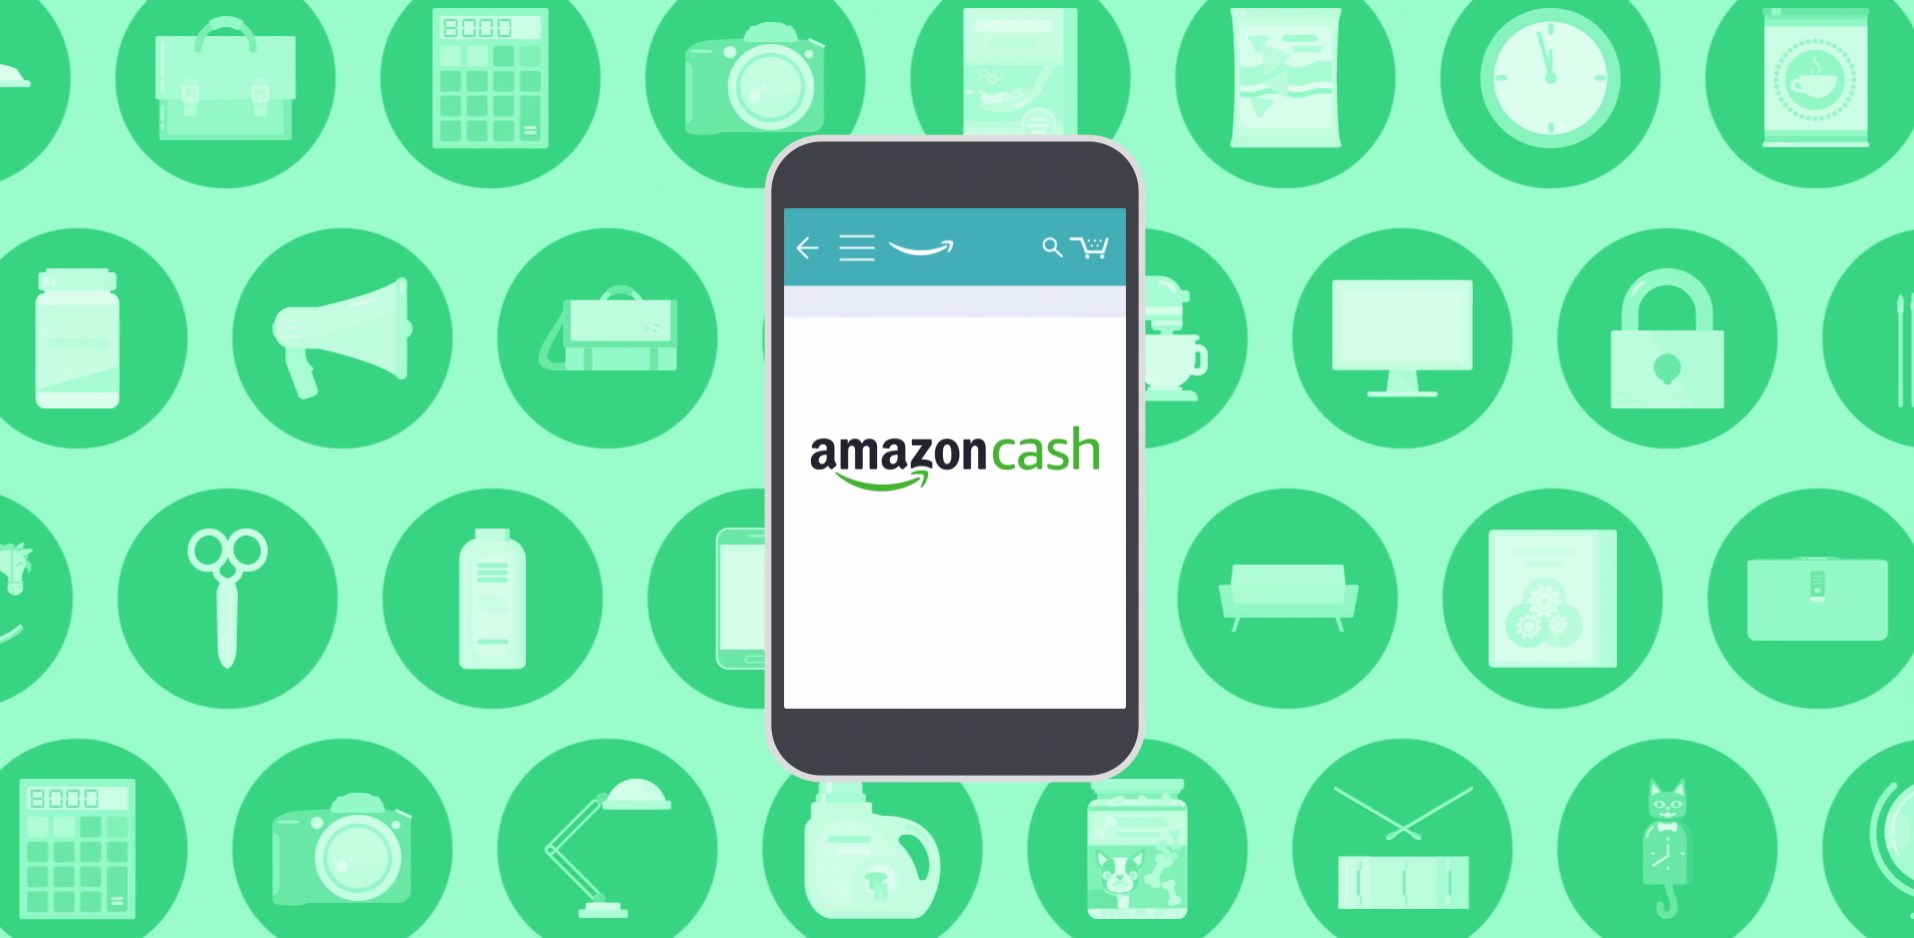 Amazon Cash: Add $30 or more, get a $5 Amazon credit